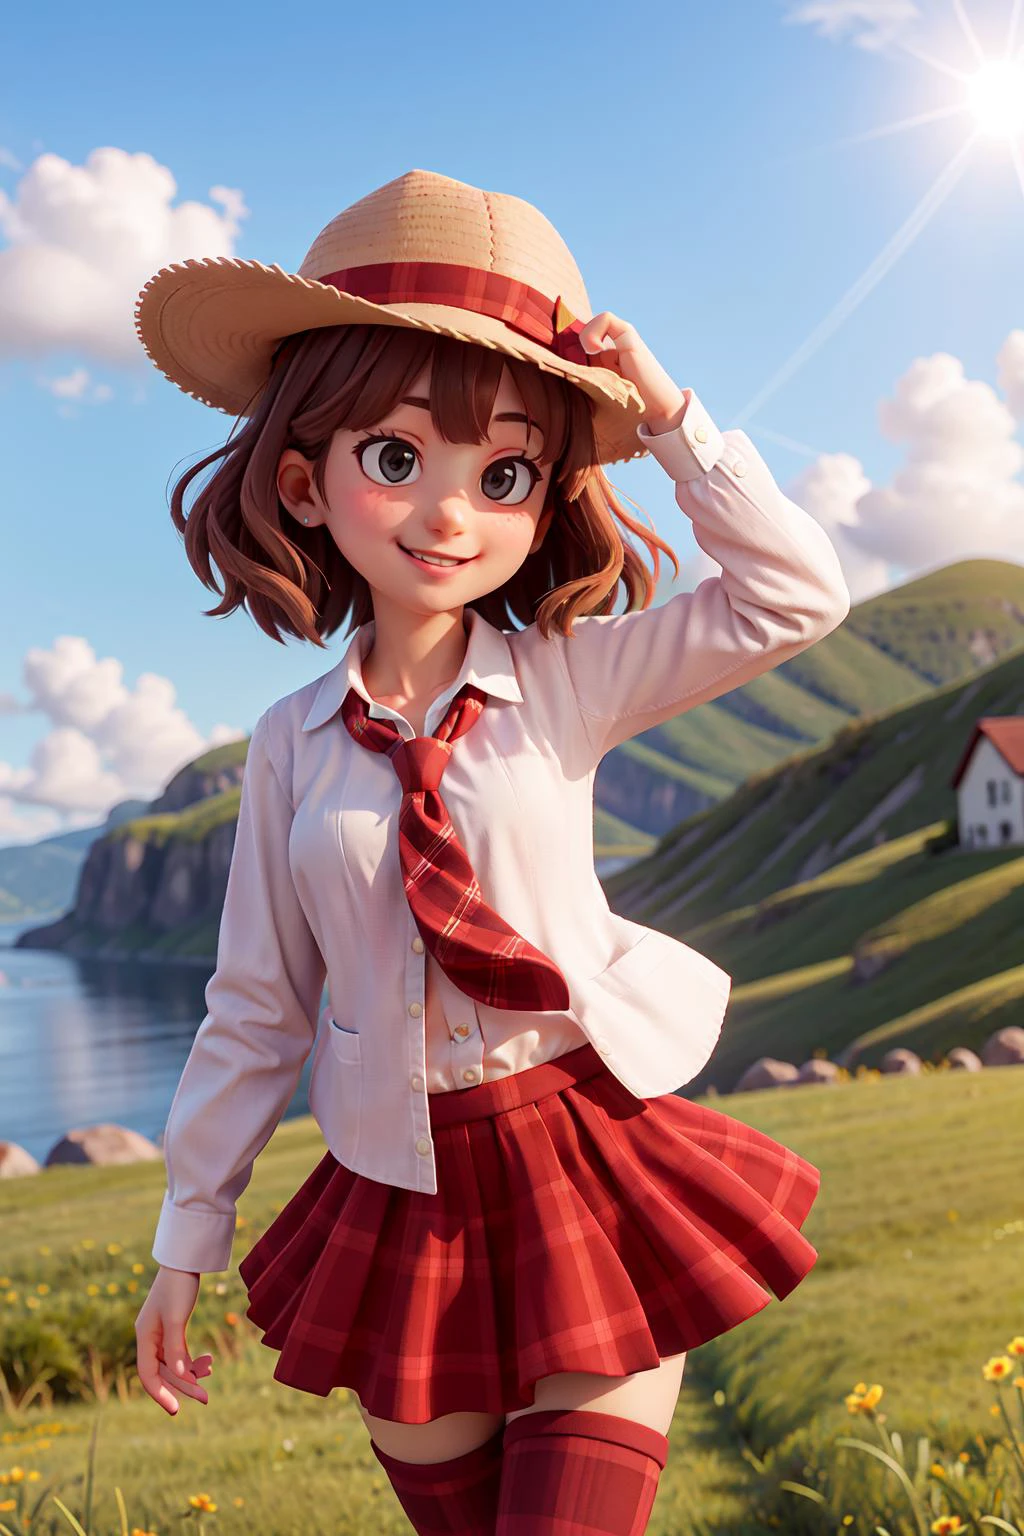 Anime girl in a red skirt and hat walking in a field - SeaArt AI